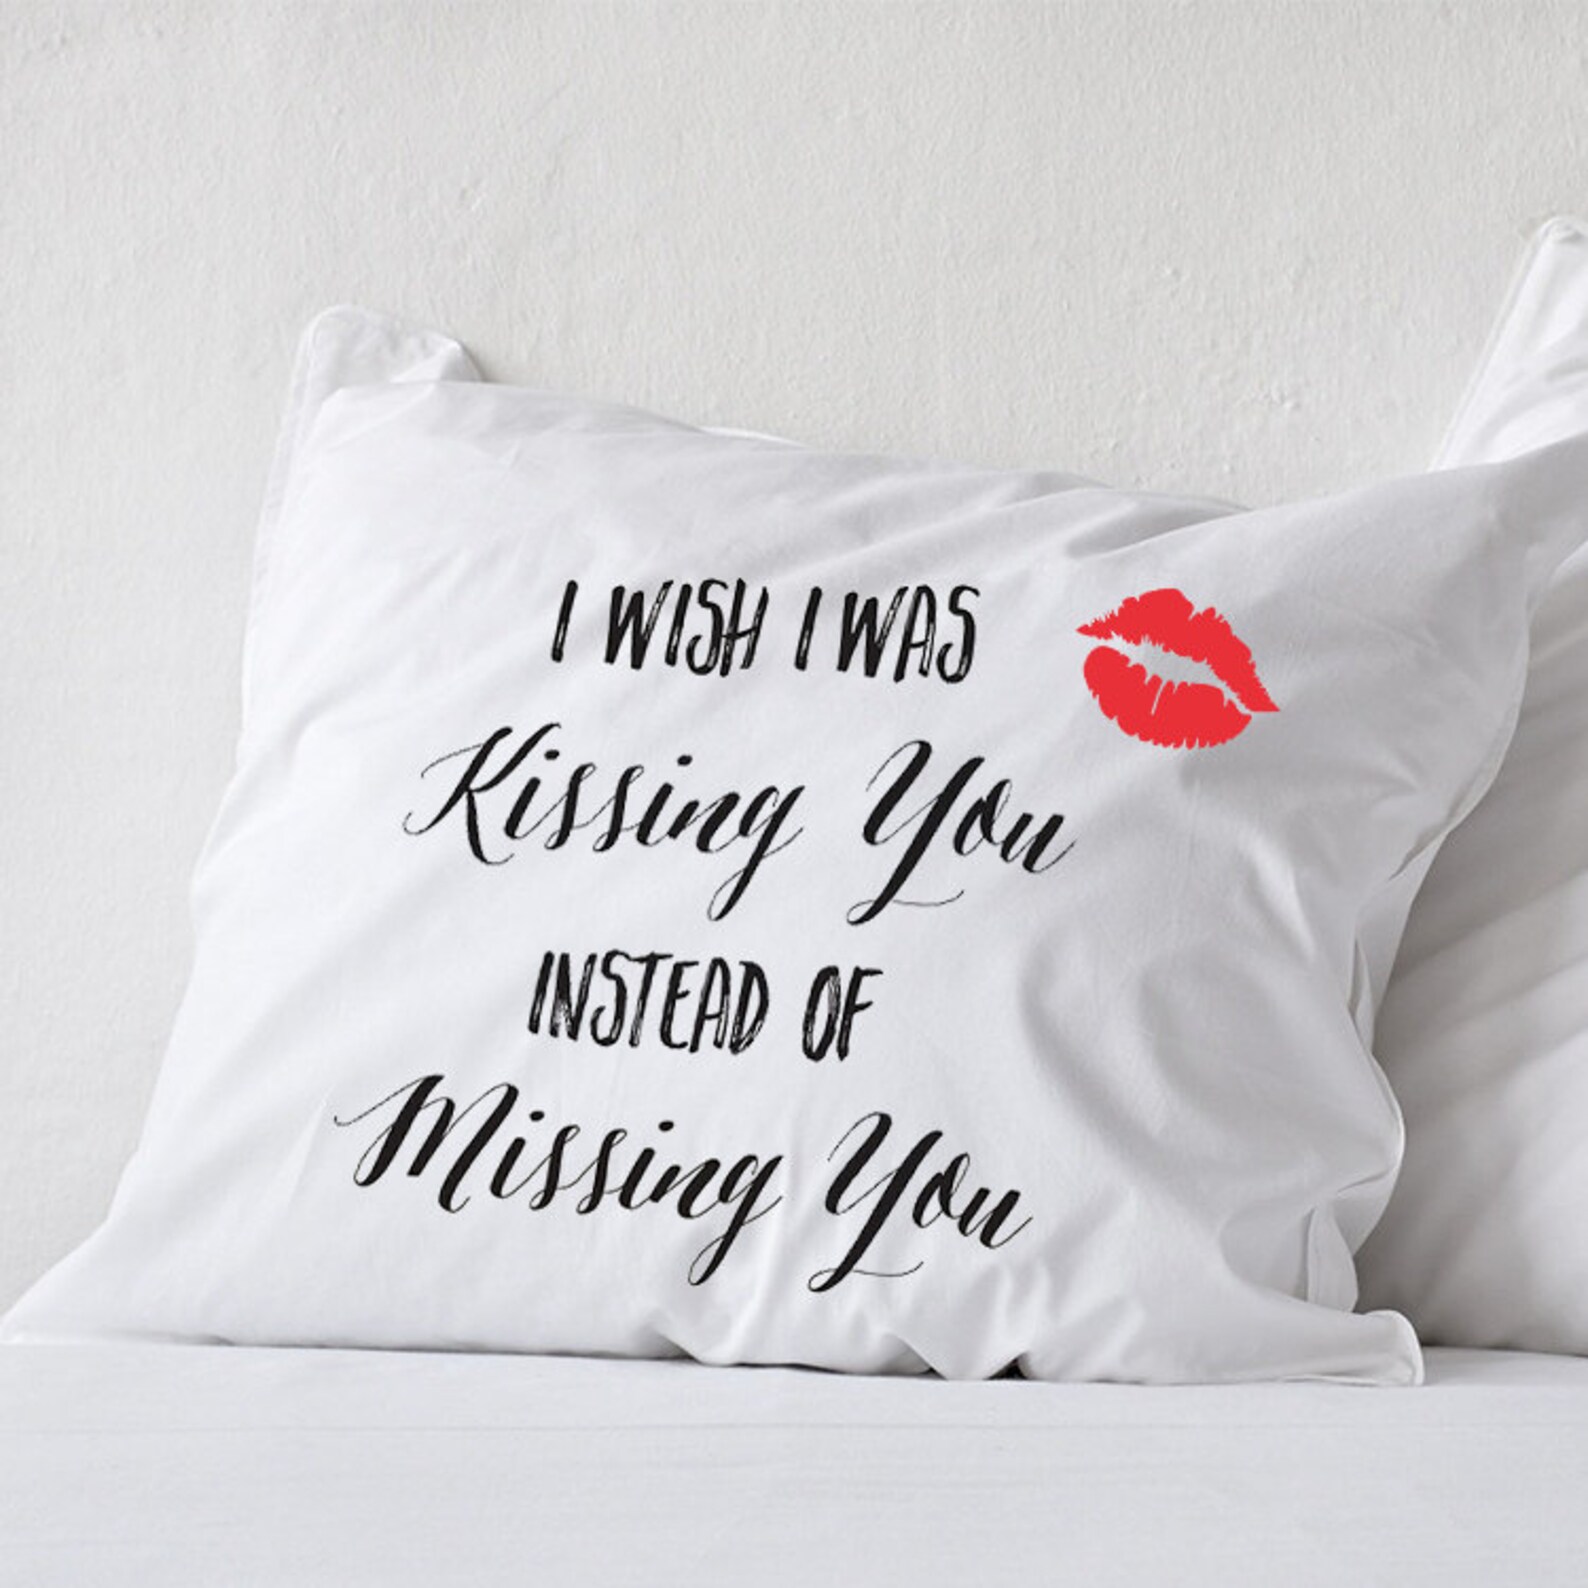 Long distance relationship Pillow Missing You I Miss You Gift image 0.